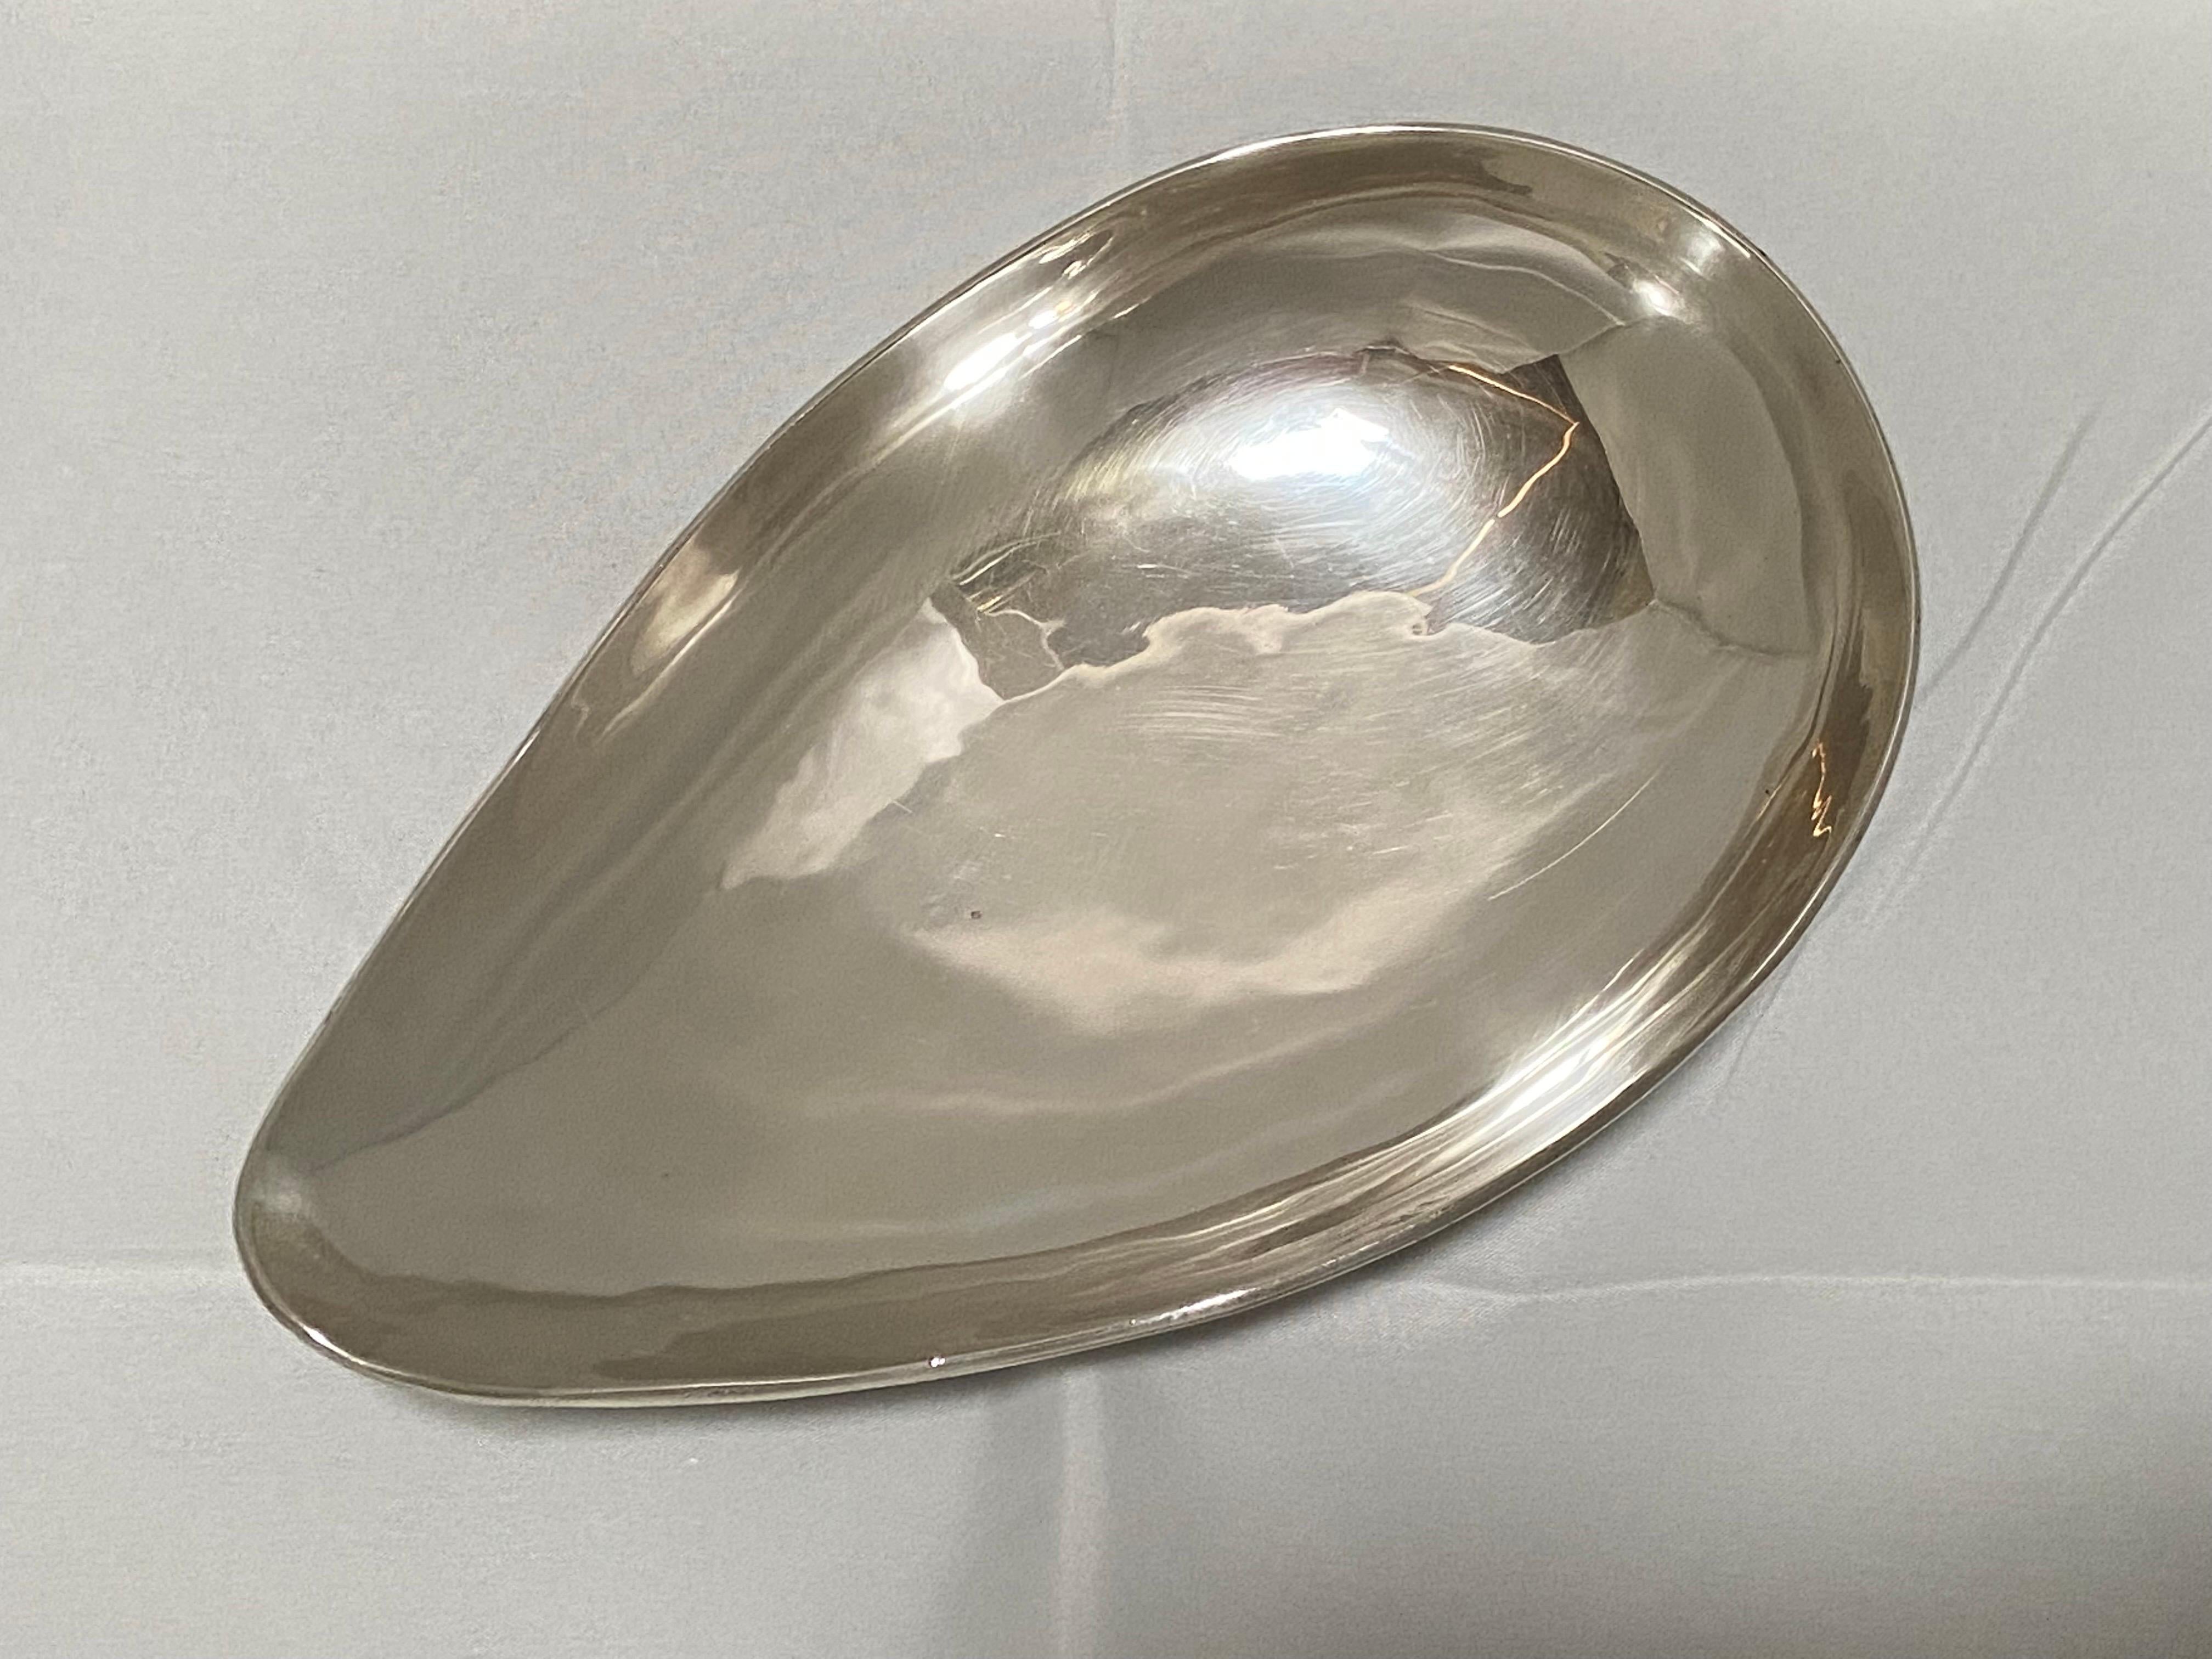 Vintage Mexican Mid-Century Modern Sterling Silver Footed Bowl or Dish by Zurita For Sale 1